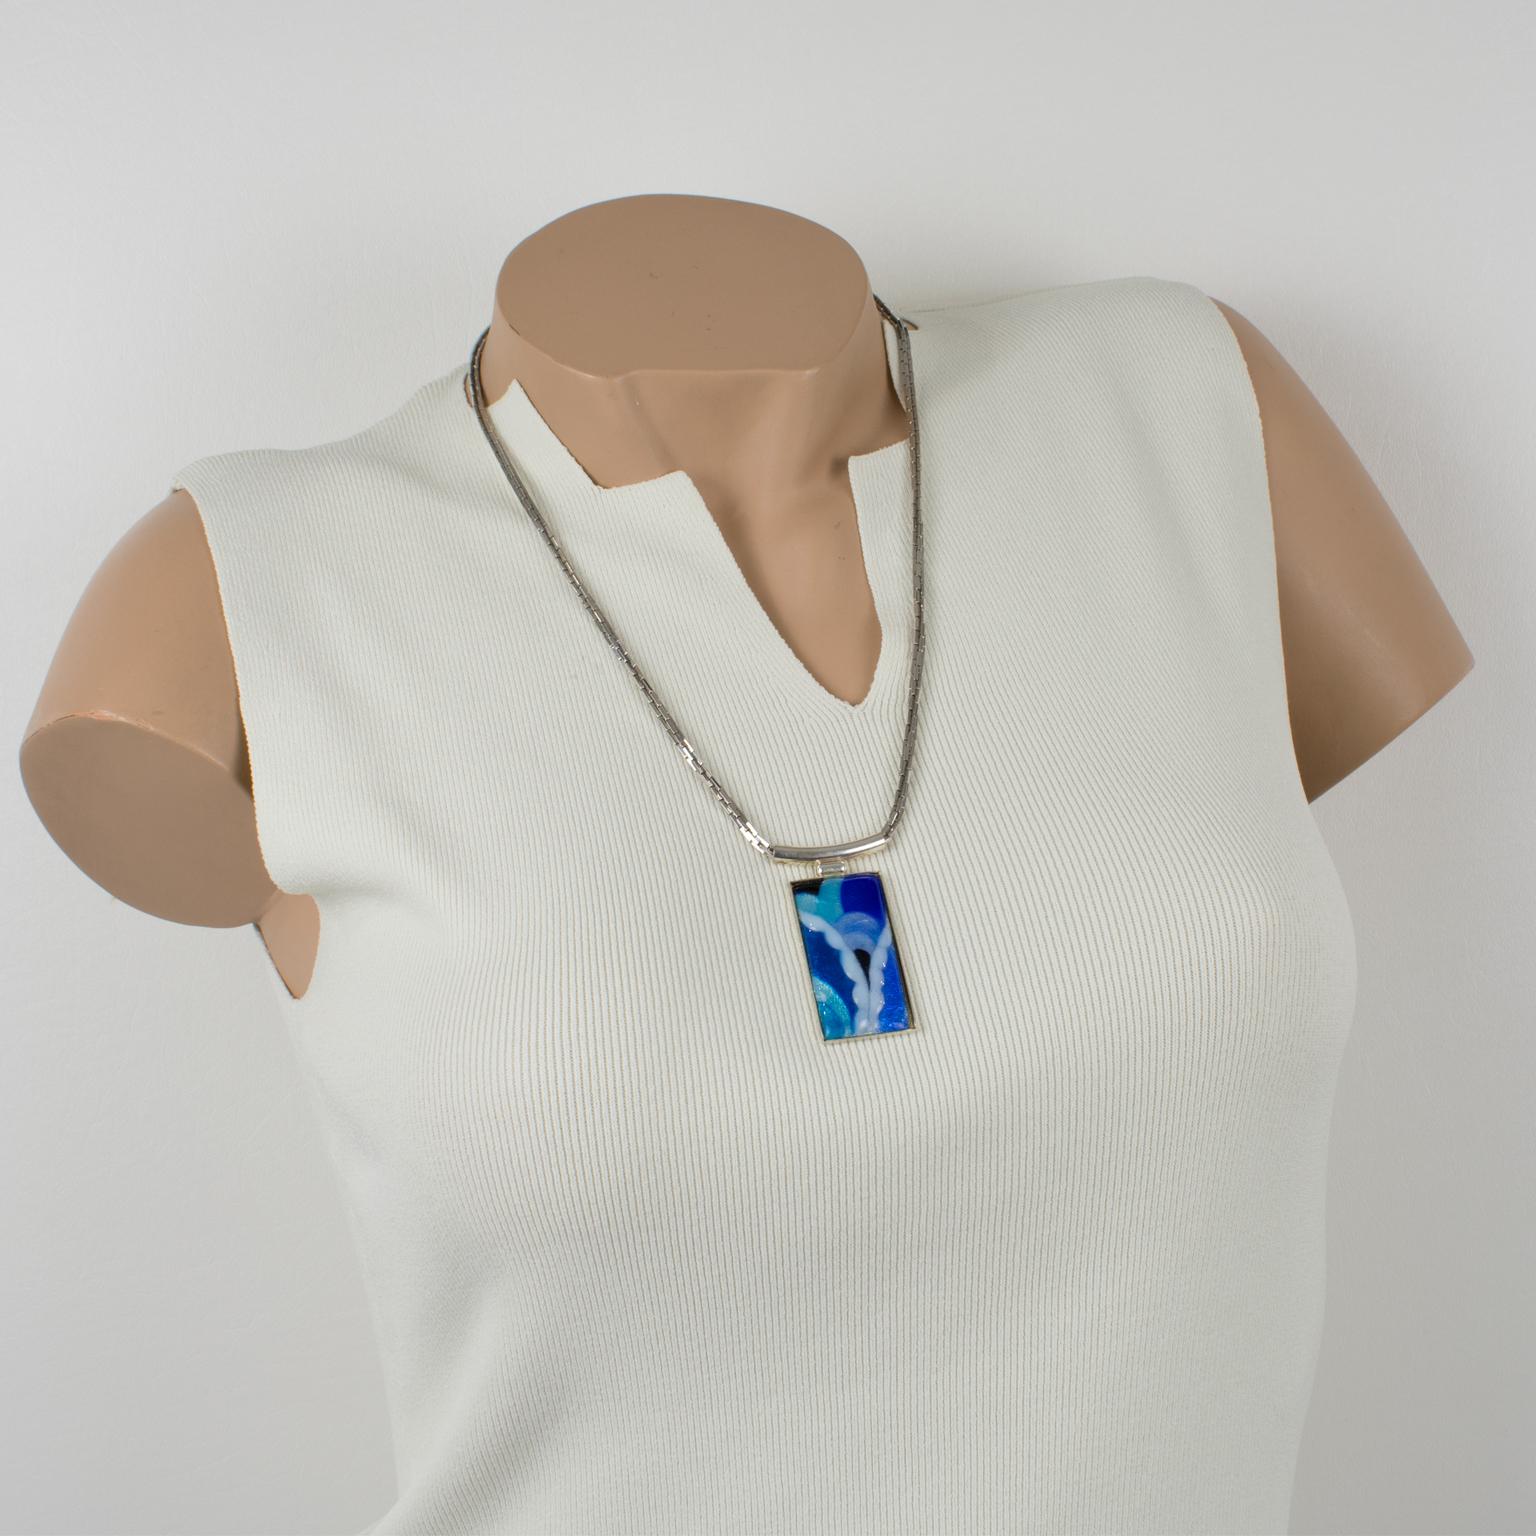 Amazing pendant necklace by Limoges enamelist artist Mauricette Pinoteau. Rectangular silver plate frame with an enamel-on-copper cameo. Art-Deco inspired design with a geometric shape. Assorted colors of cobalt blue and turquoise blue, navy blue,